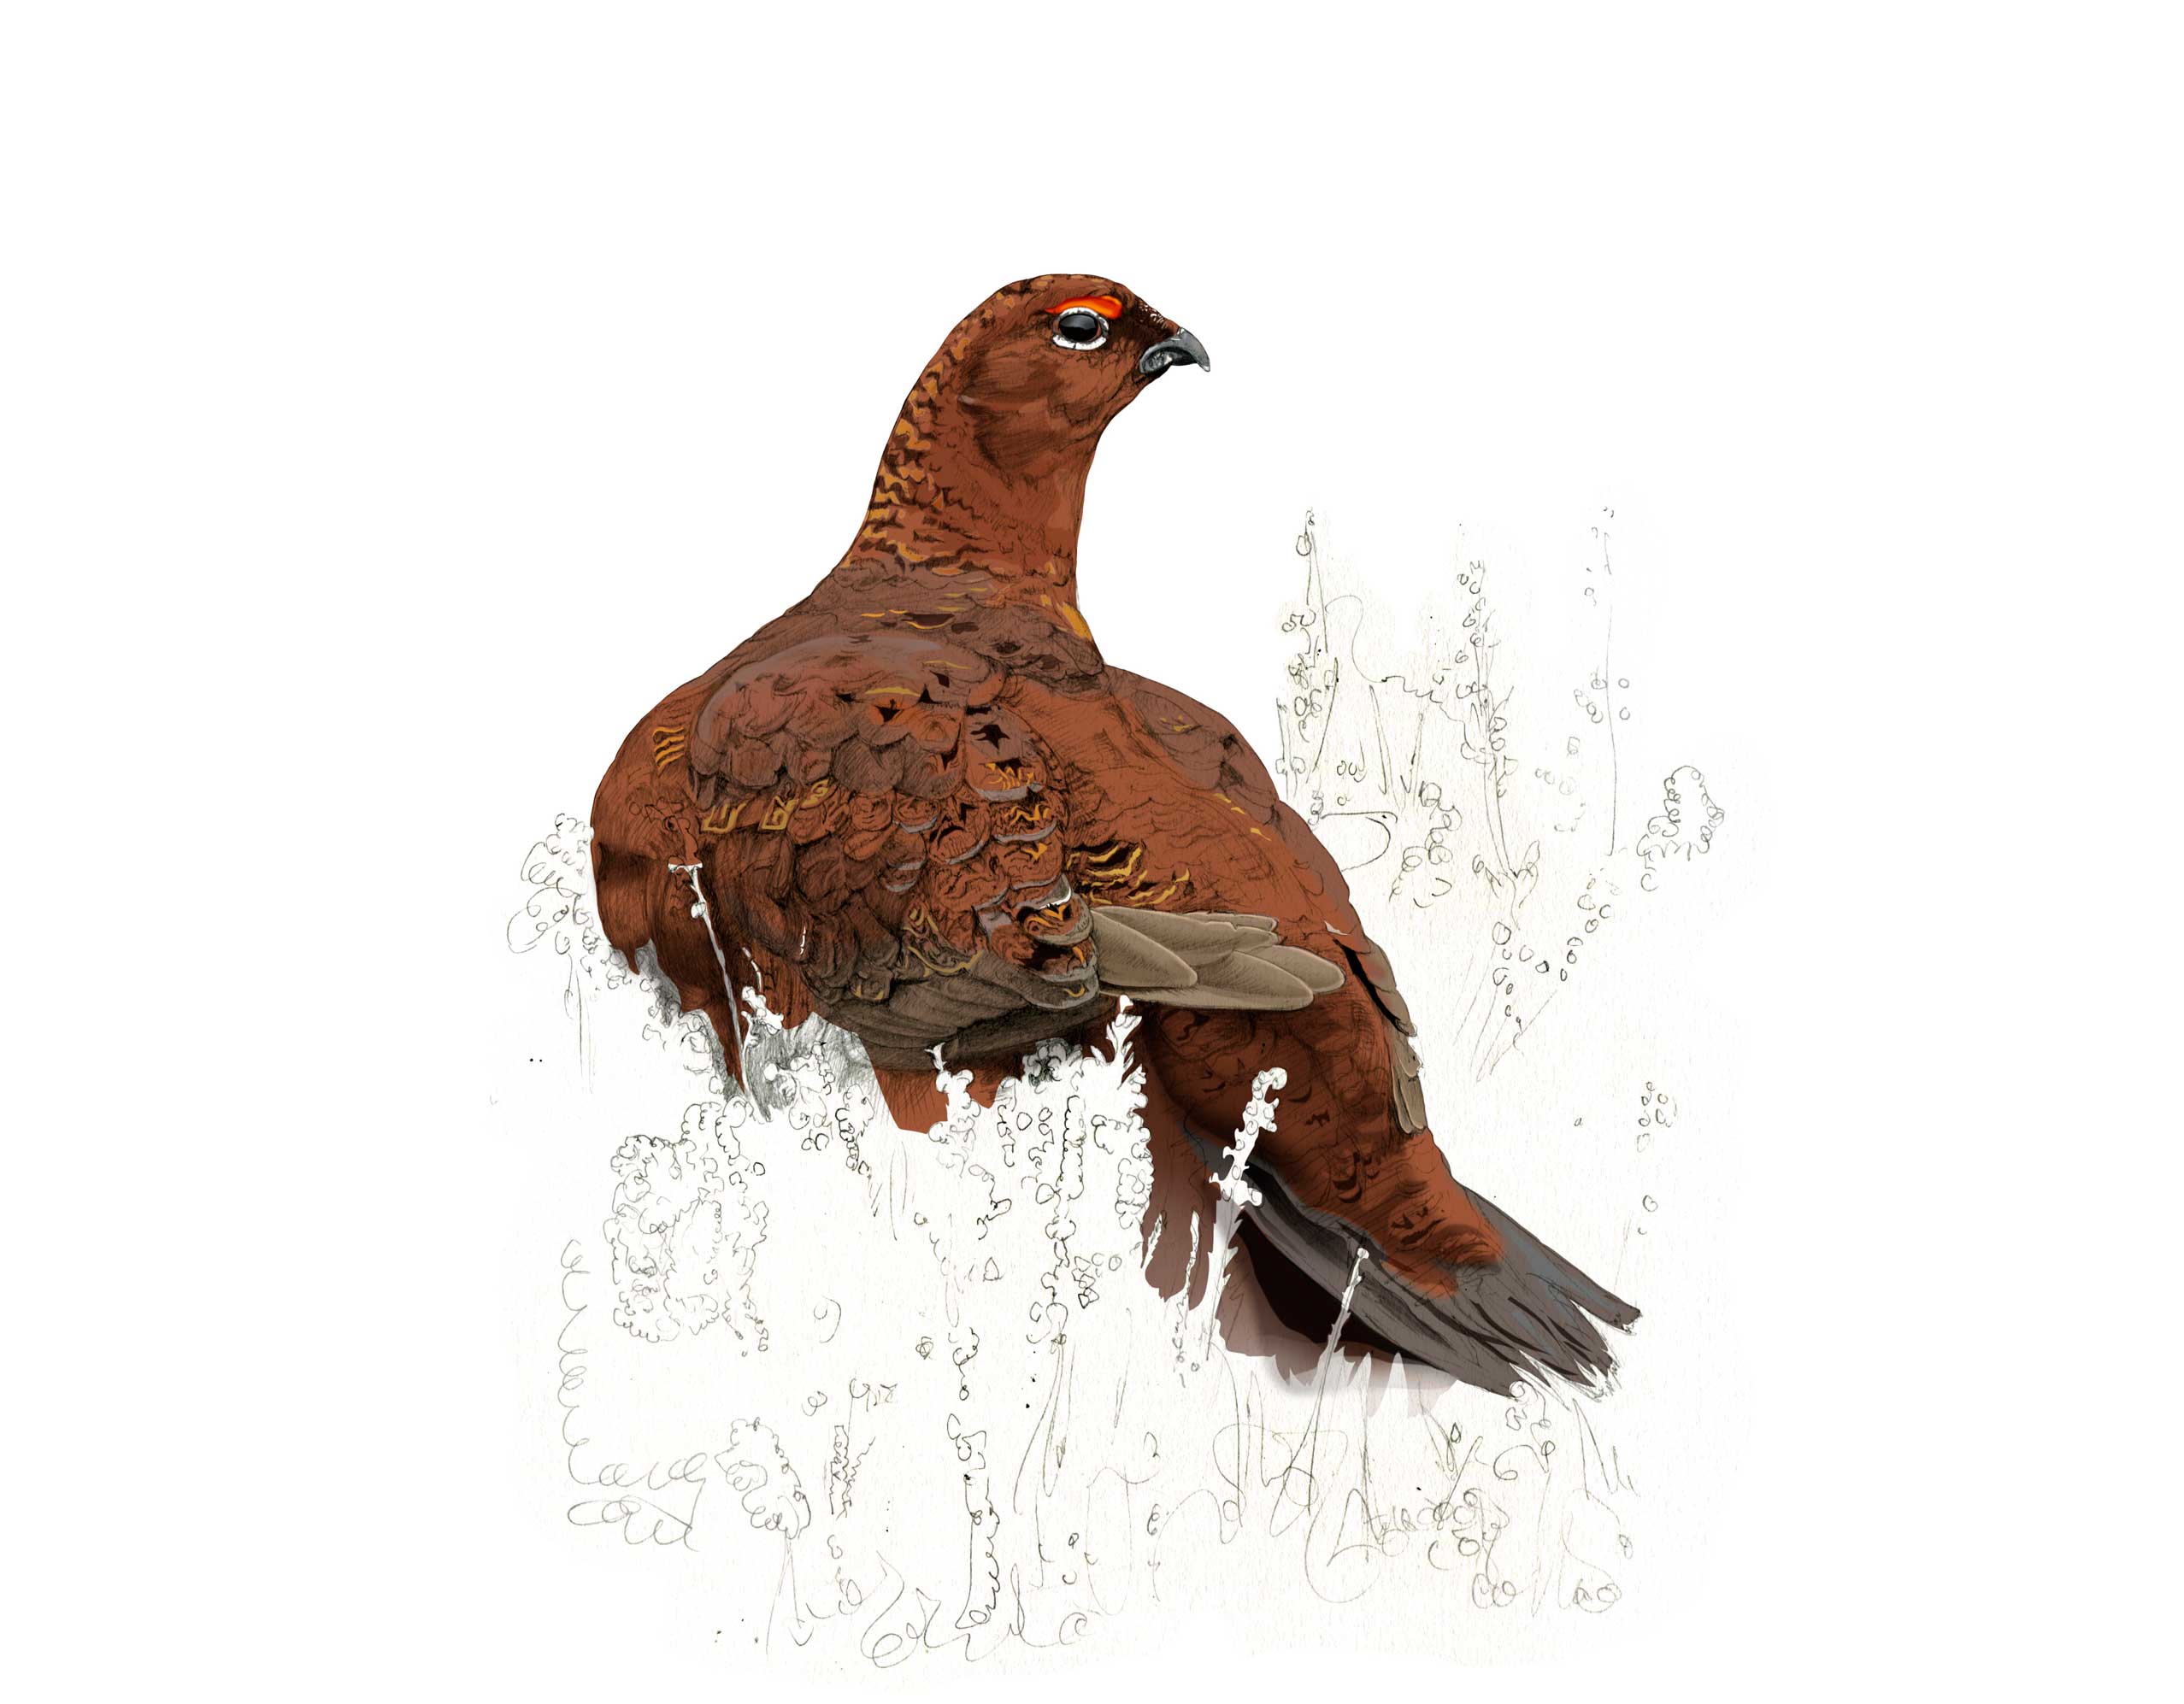 Red Grouse illustration by Nick Ellwood.